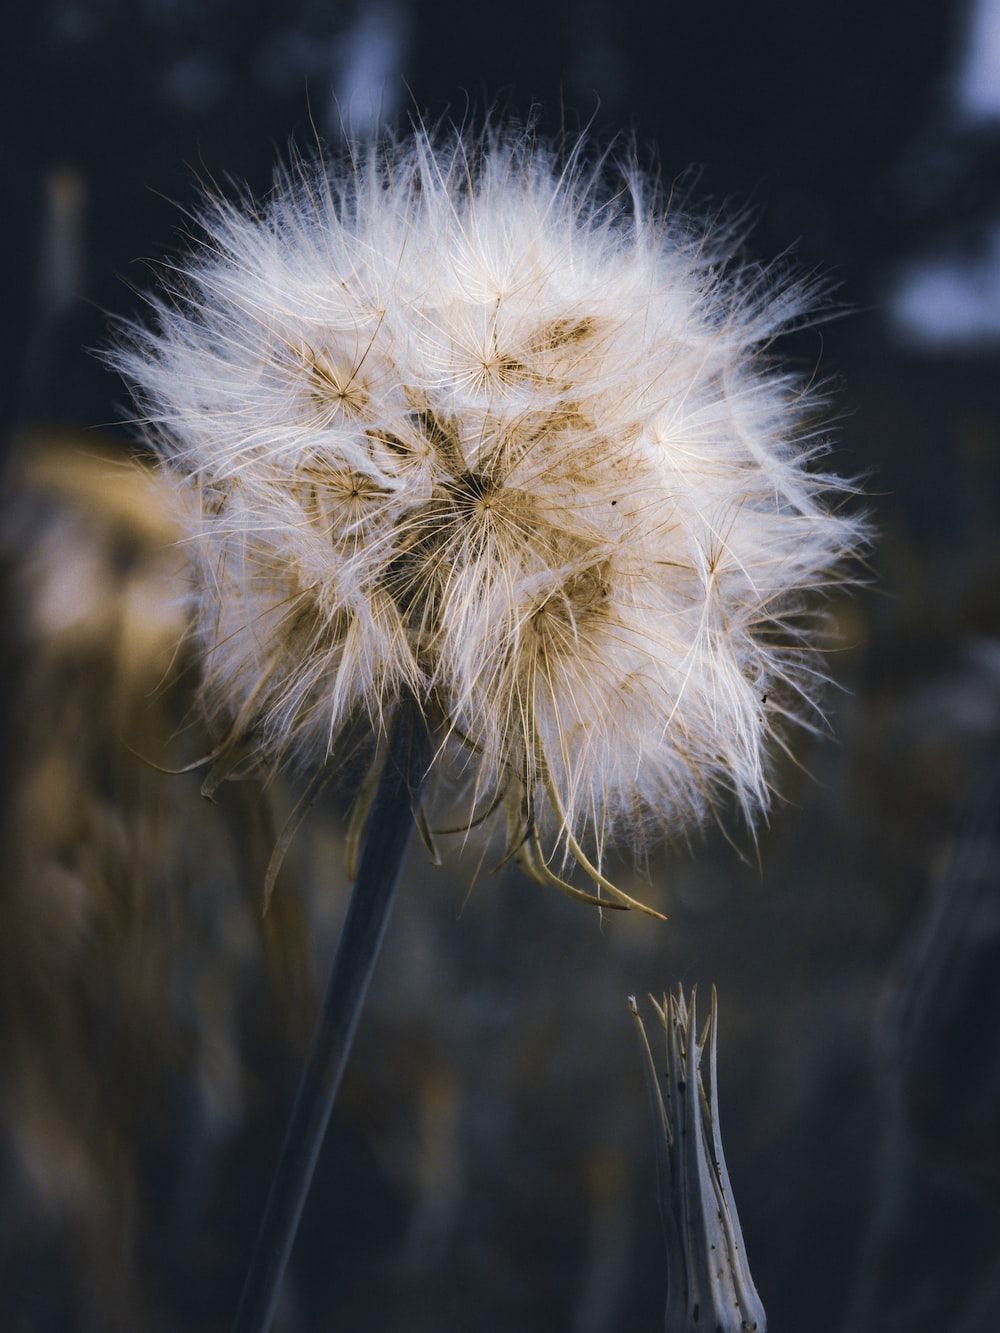 A close up of a dandelion with a blurry background photo